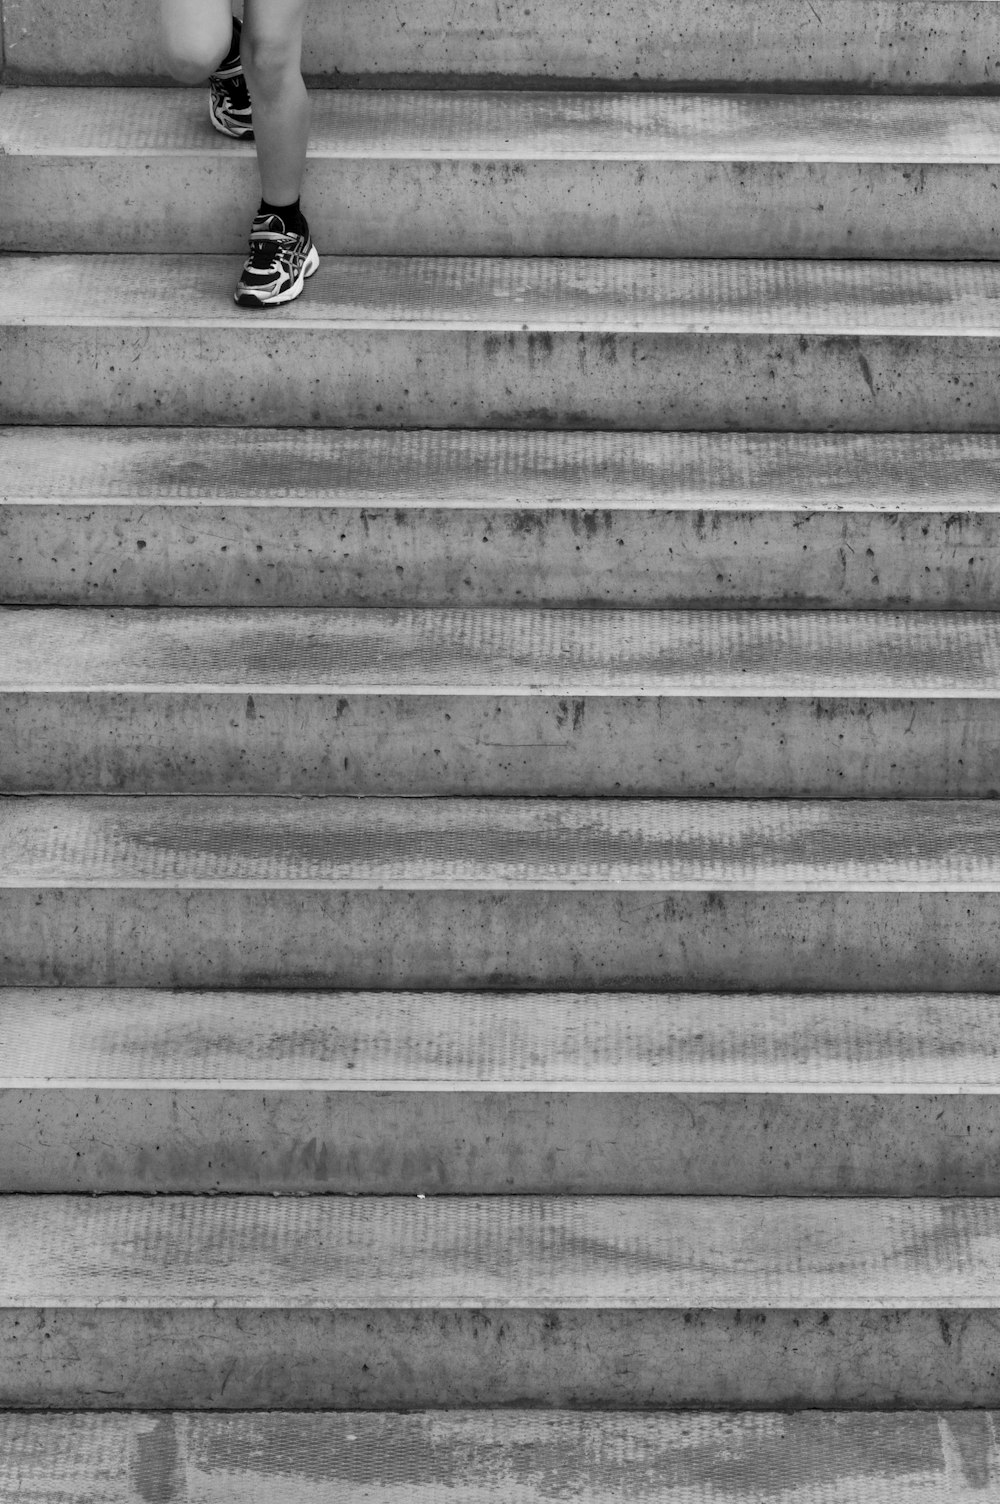 grayscale photo of person's foot on staircase